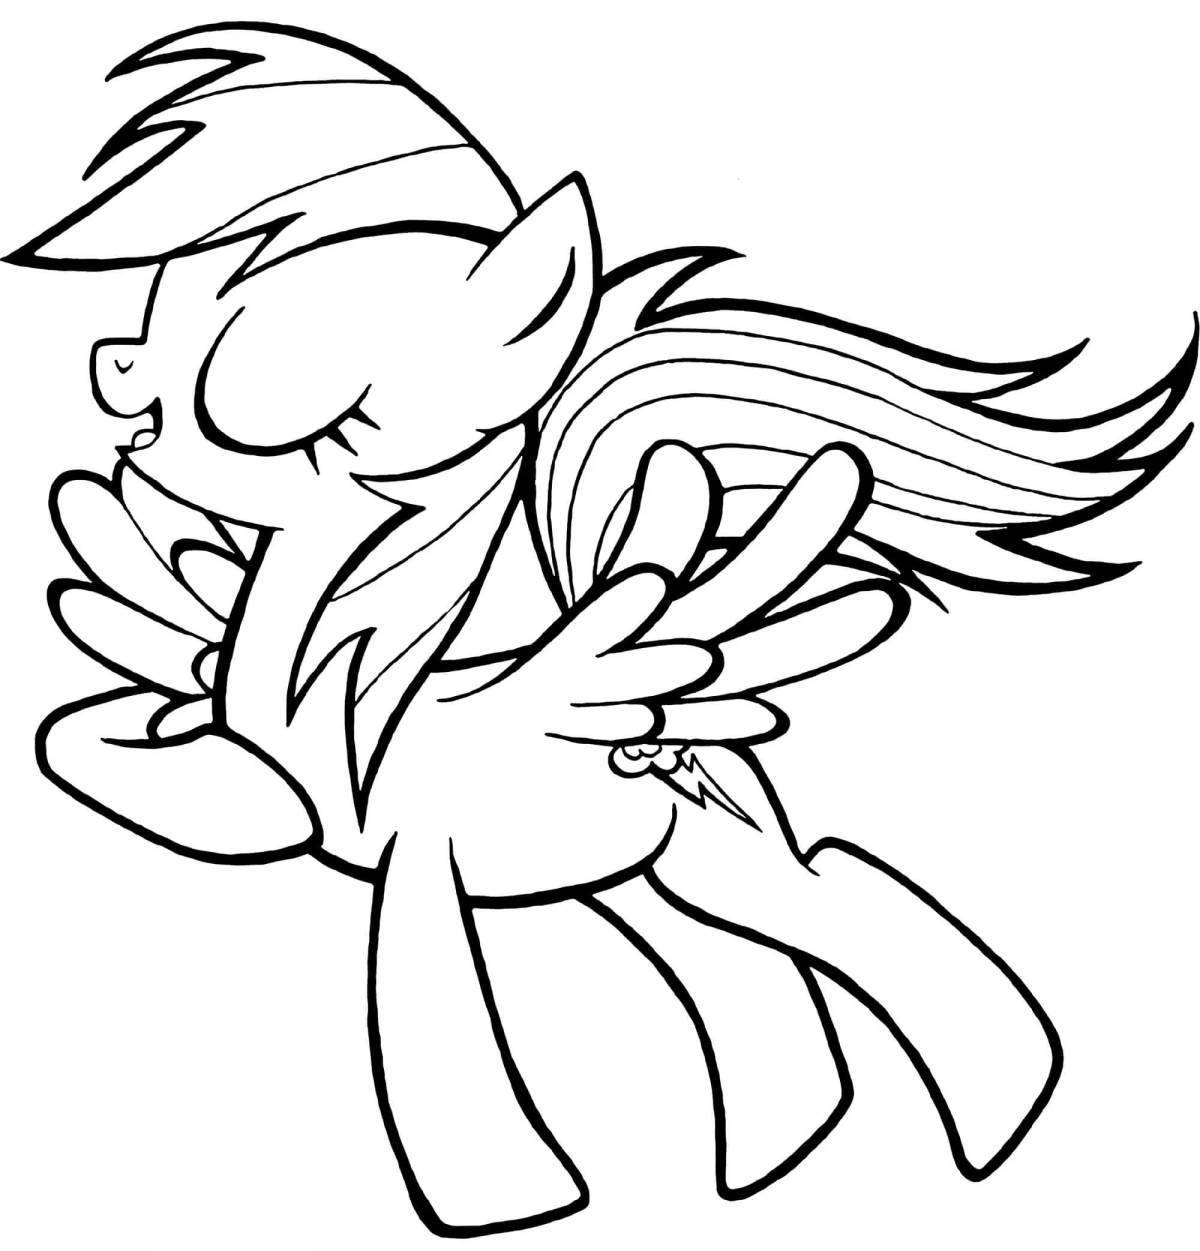 Coloring page charming rainbow pony